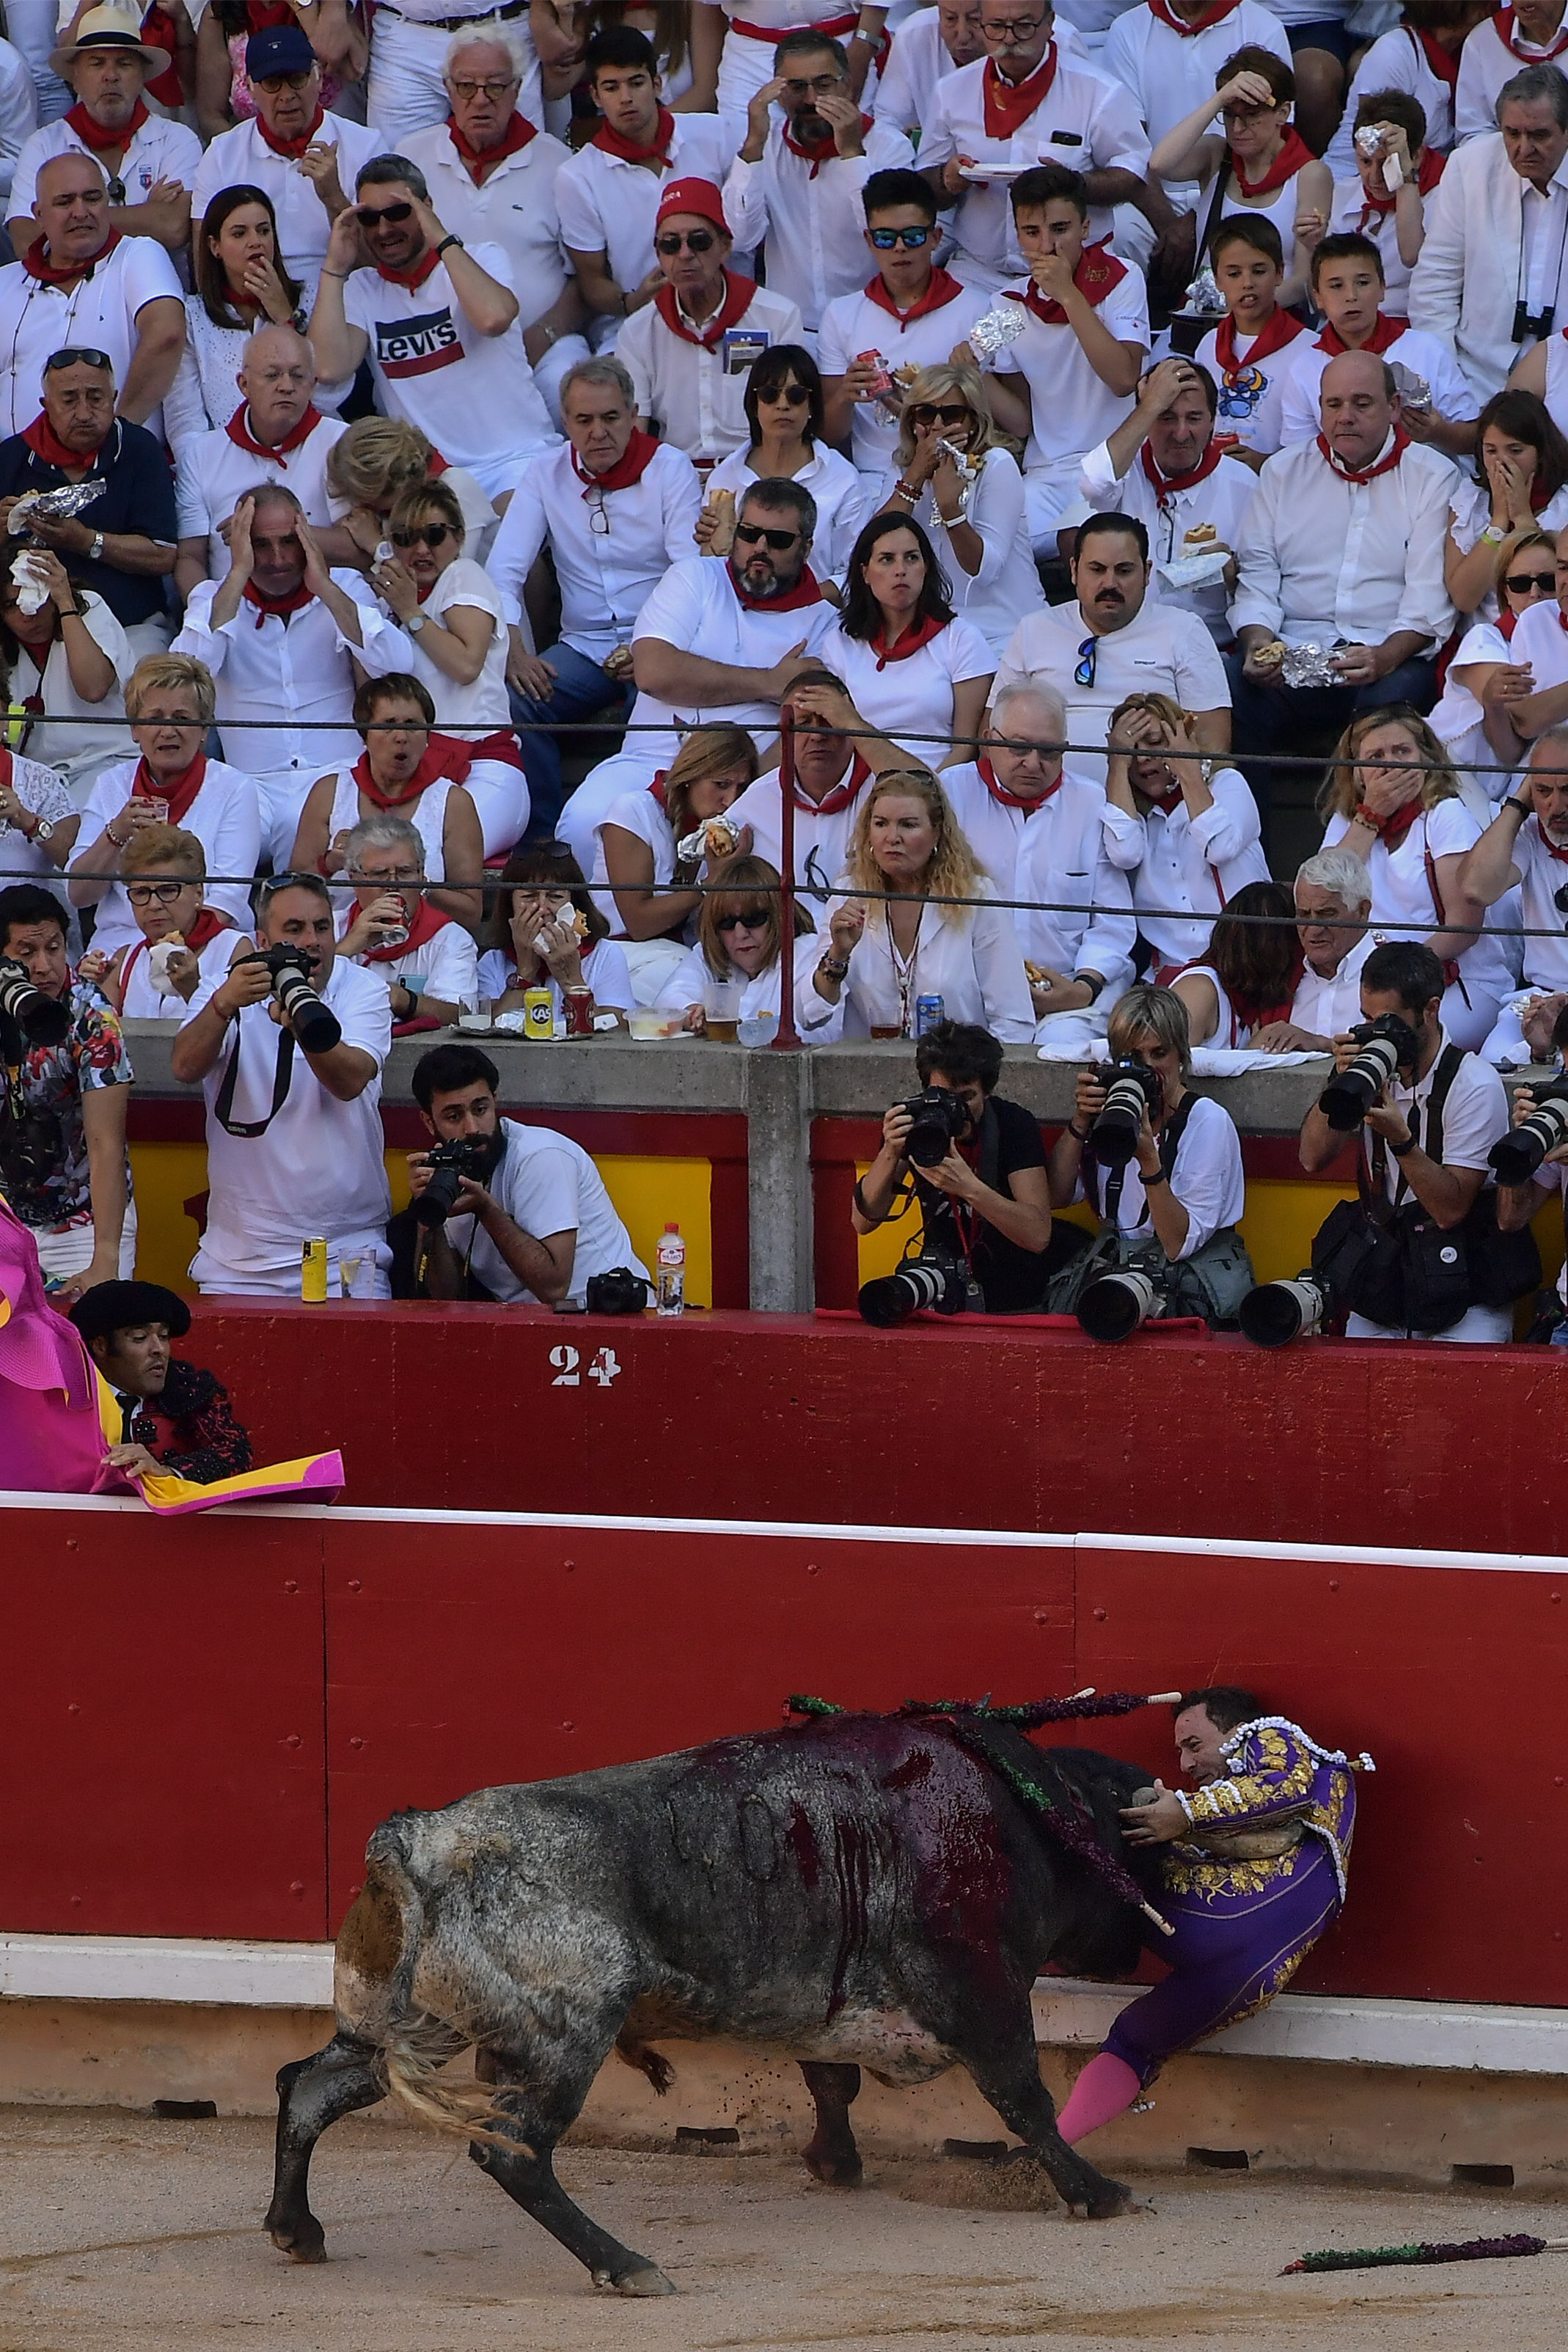 Spanish bullfighter Rafaelillo during a bullfight at the San Fermin Festival in Pamplona, northern Spain, Sunday, July 14, 2018. Revellers from around the world flock to Pamplona every year to take part in the eight days of the running of the bulls. (AP Photo/Alvaro Barrientos)